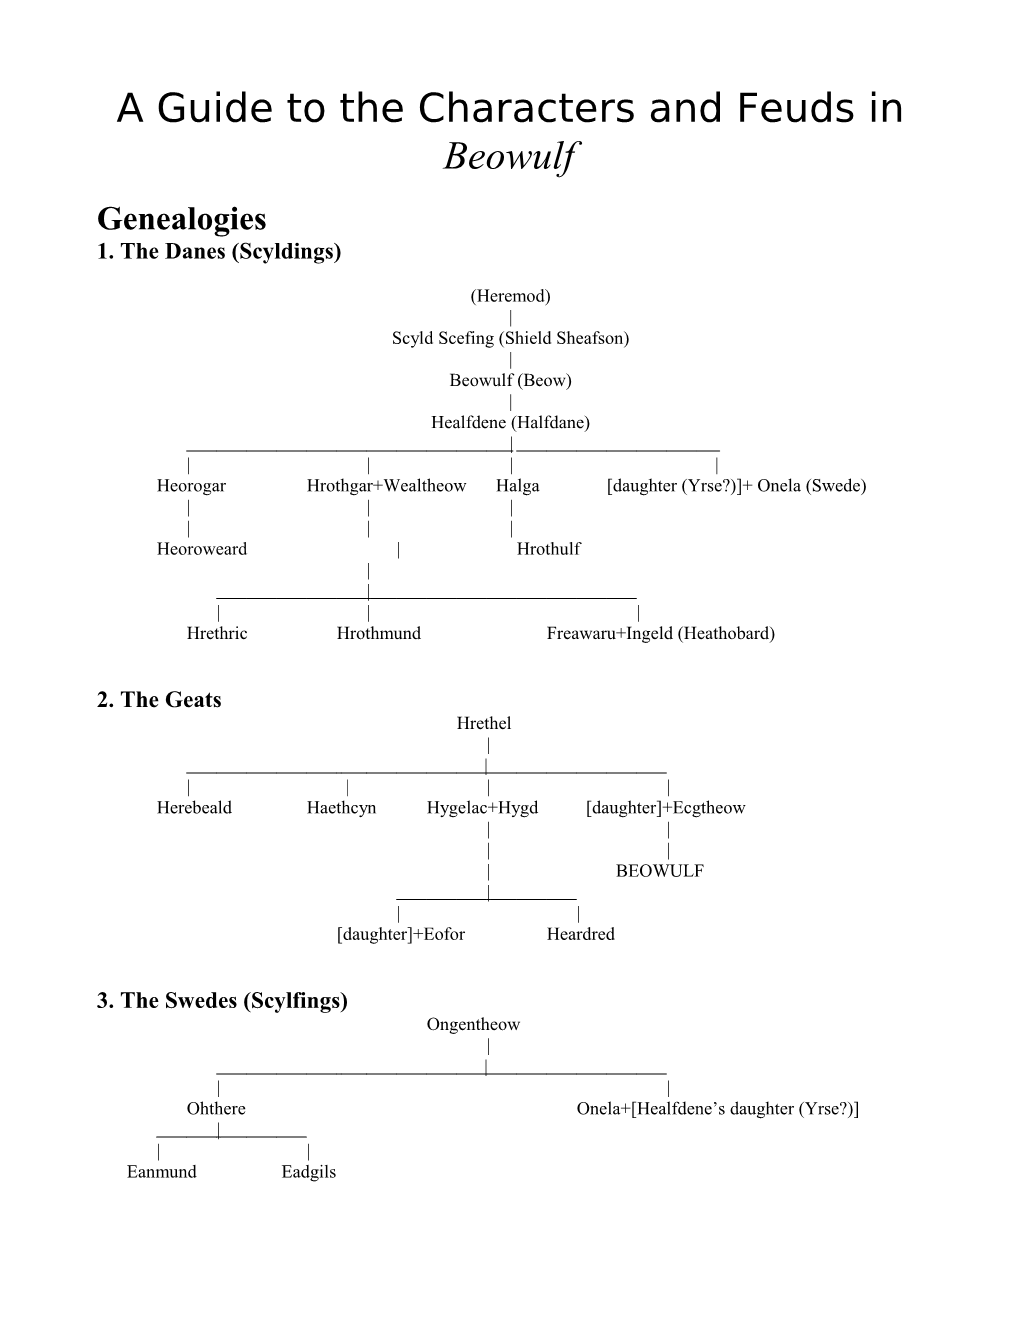 A Guide to the Characters and Feuds in Beowulf